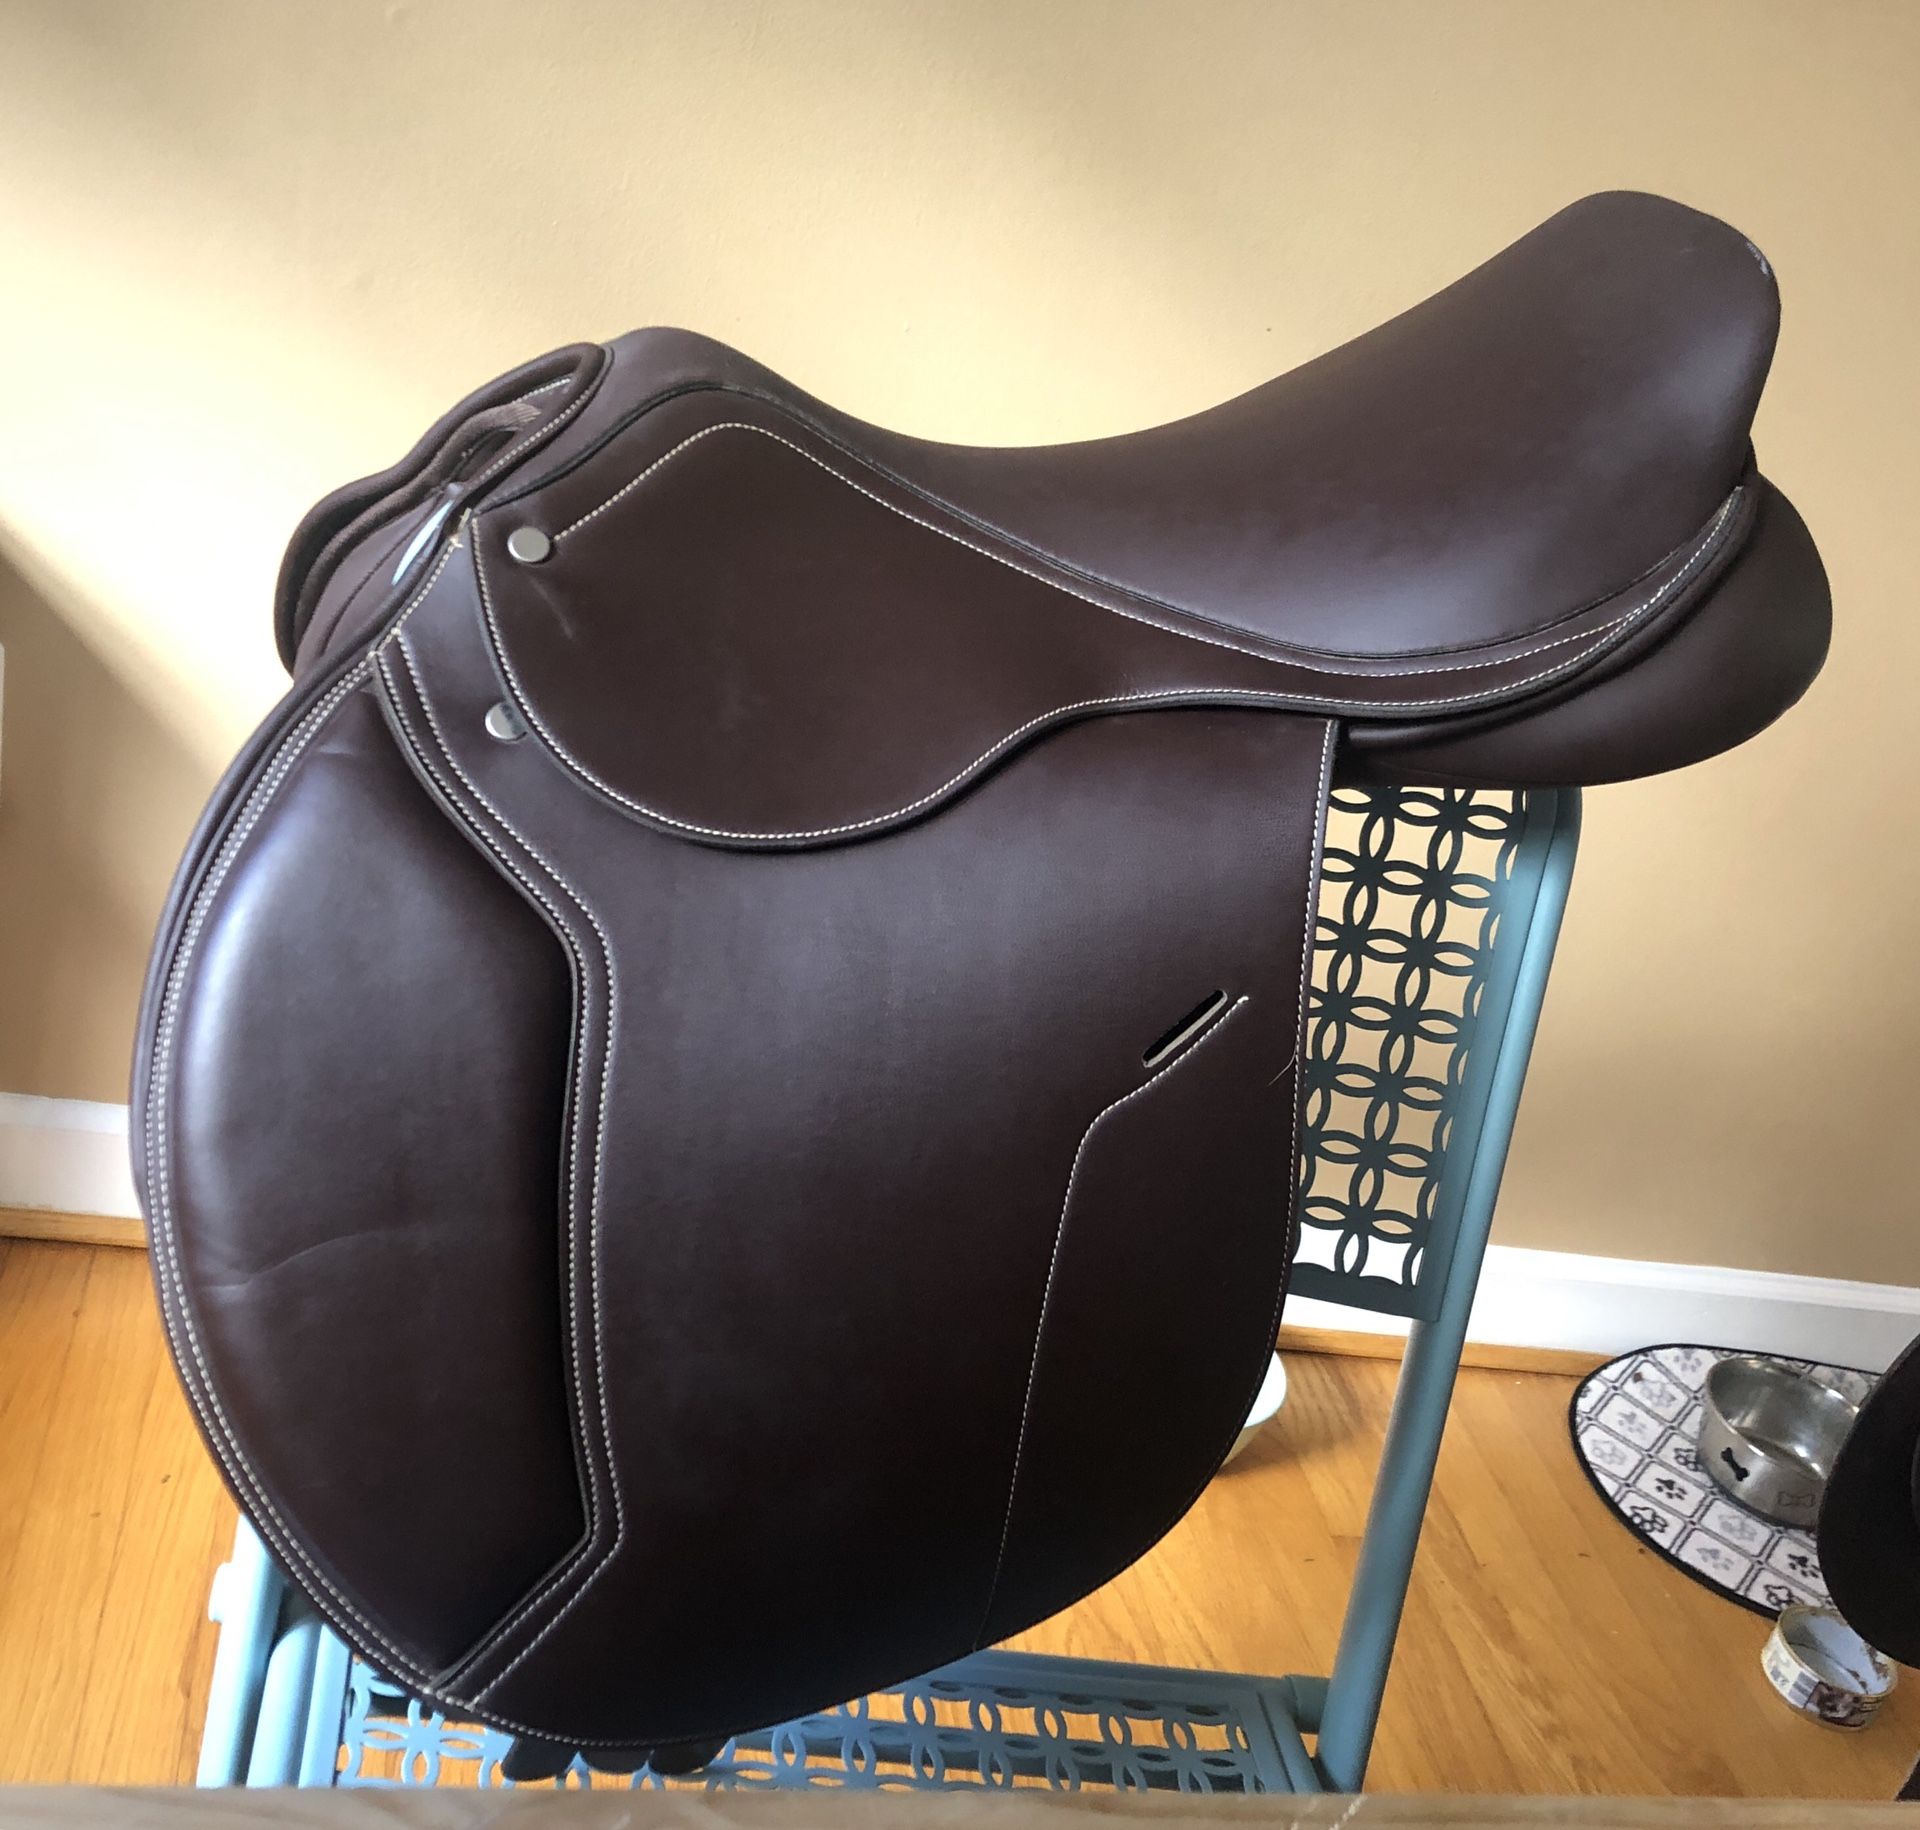 17” English Jumping Saddle. EXCELLENT condition.